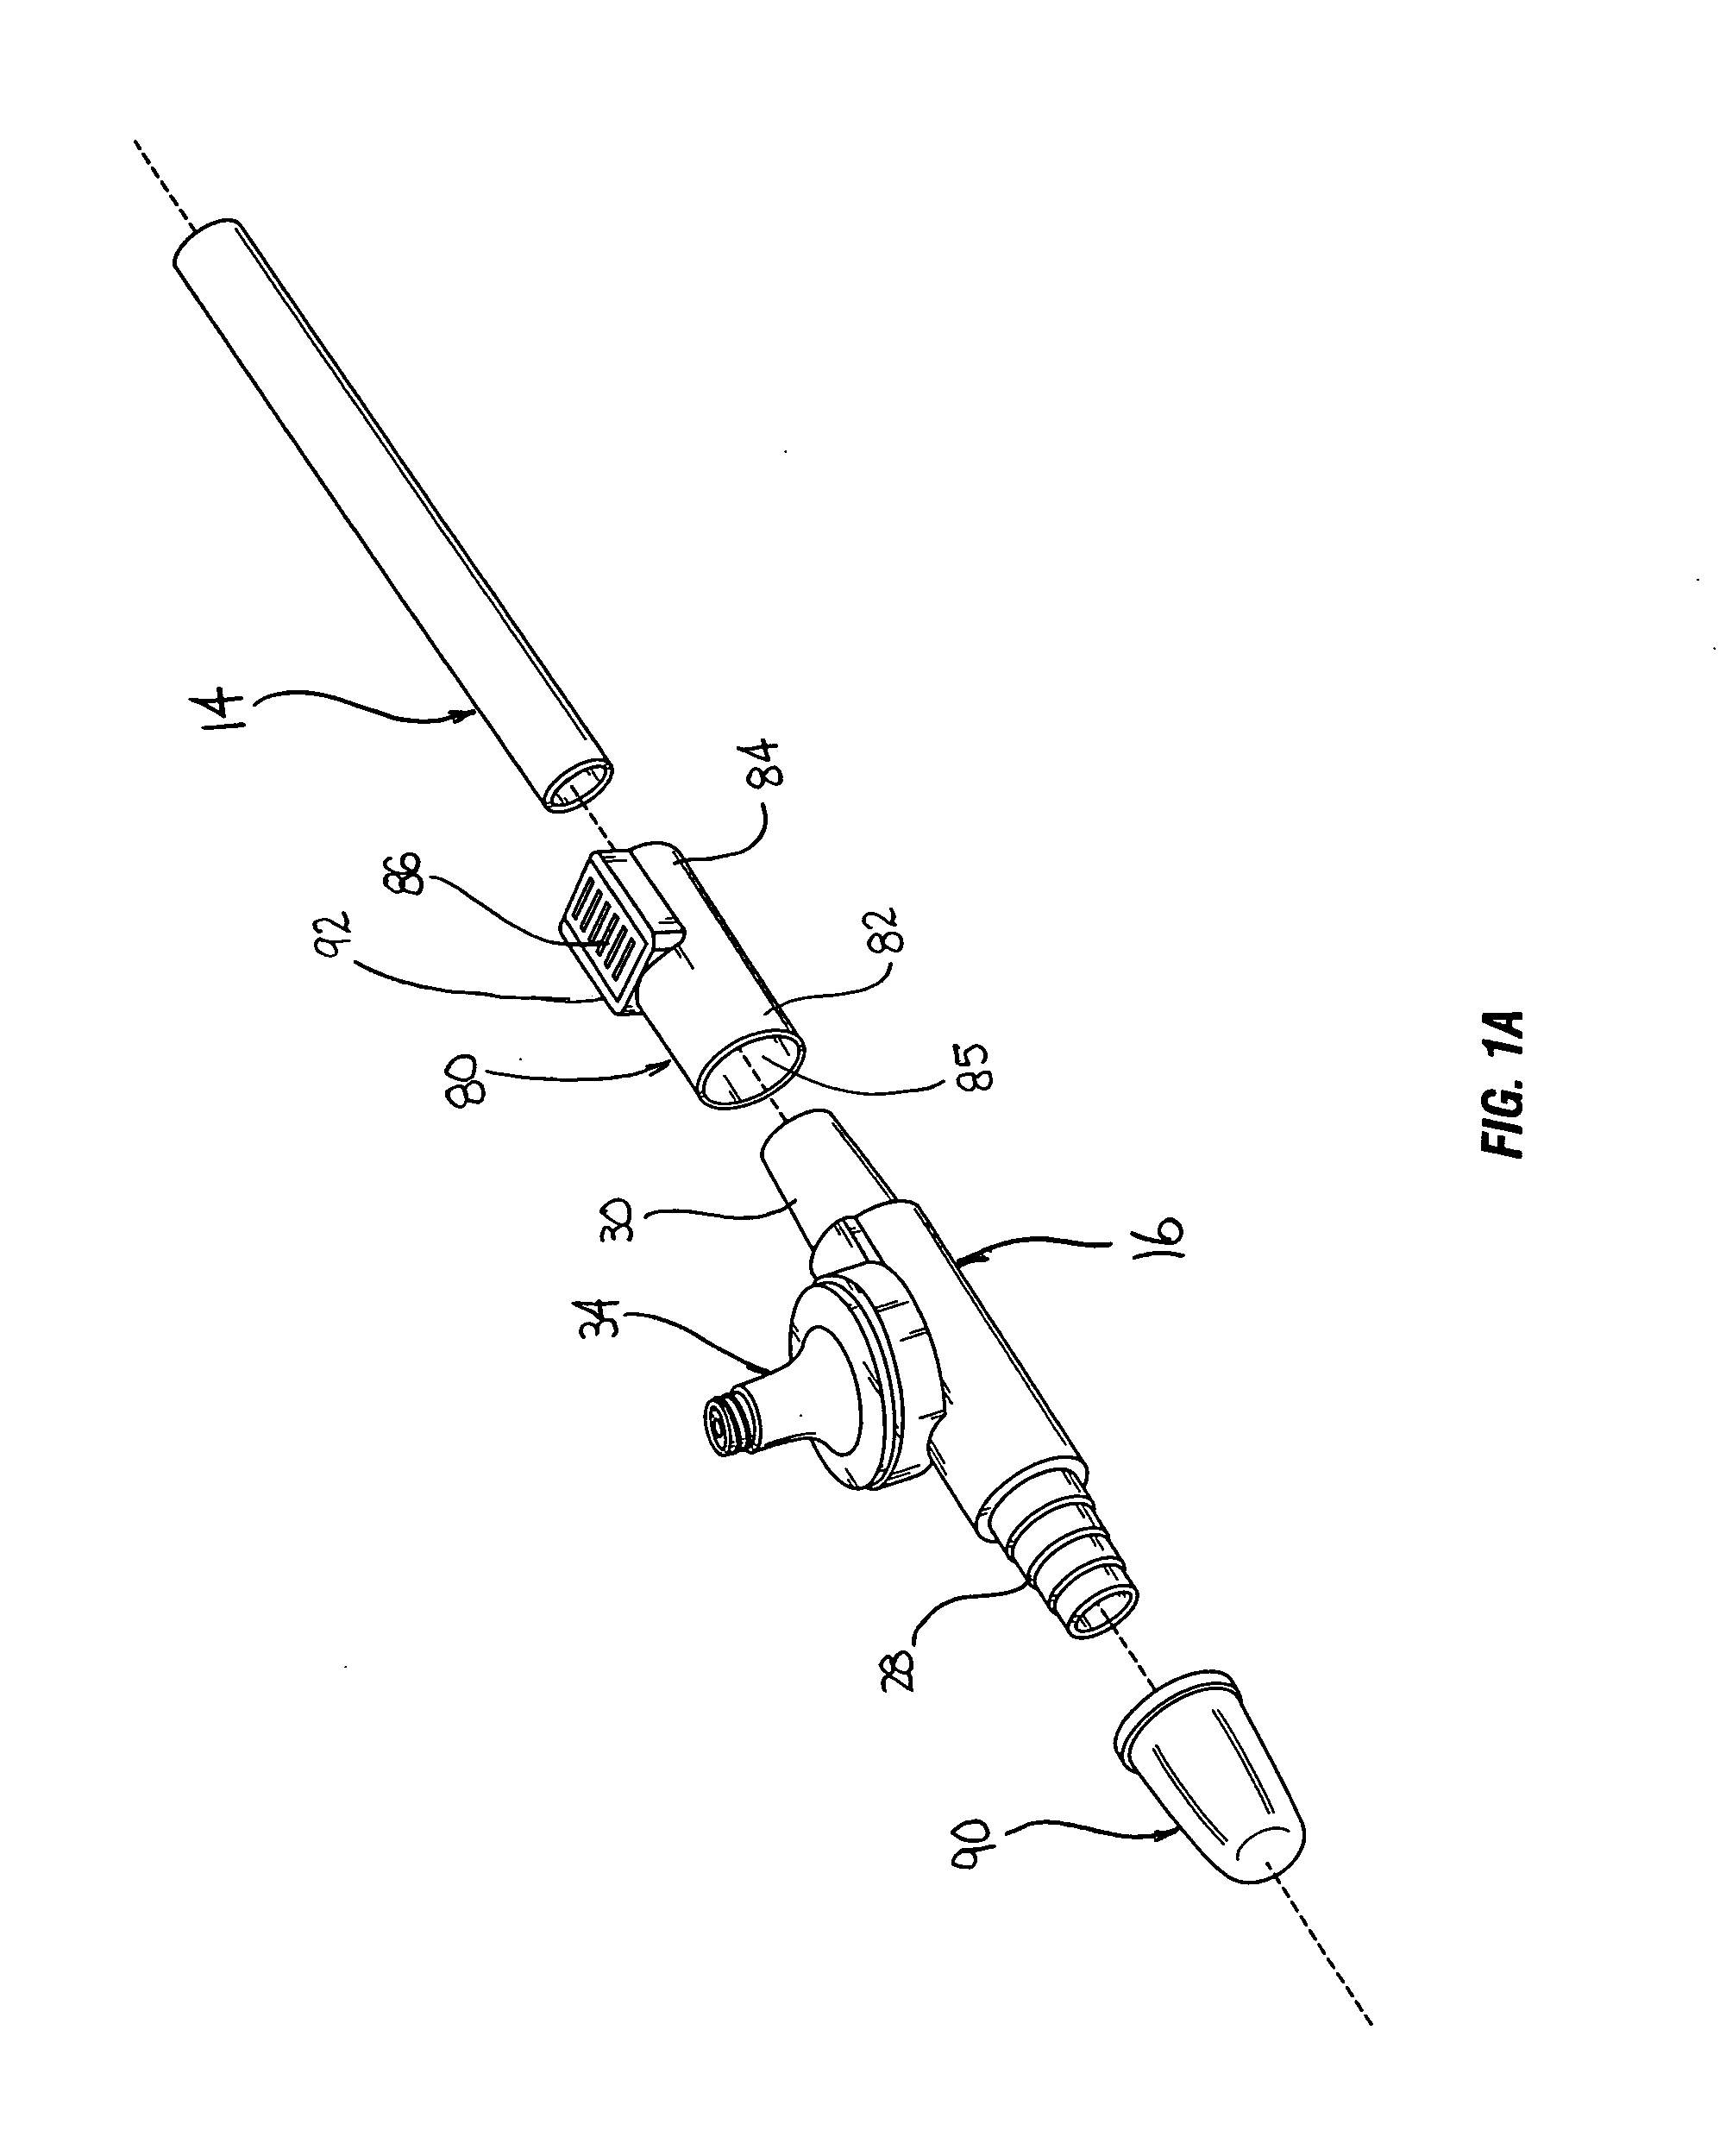 Urine collection system with needleless sampling port